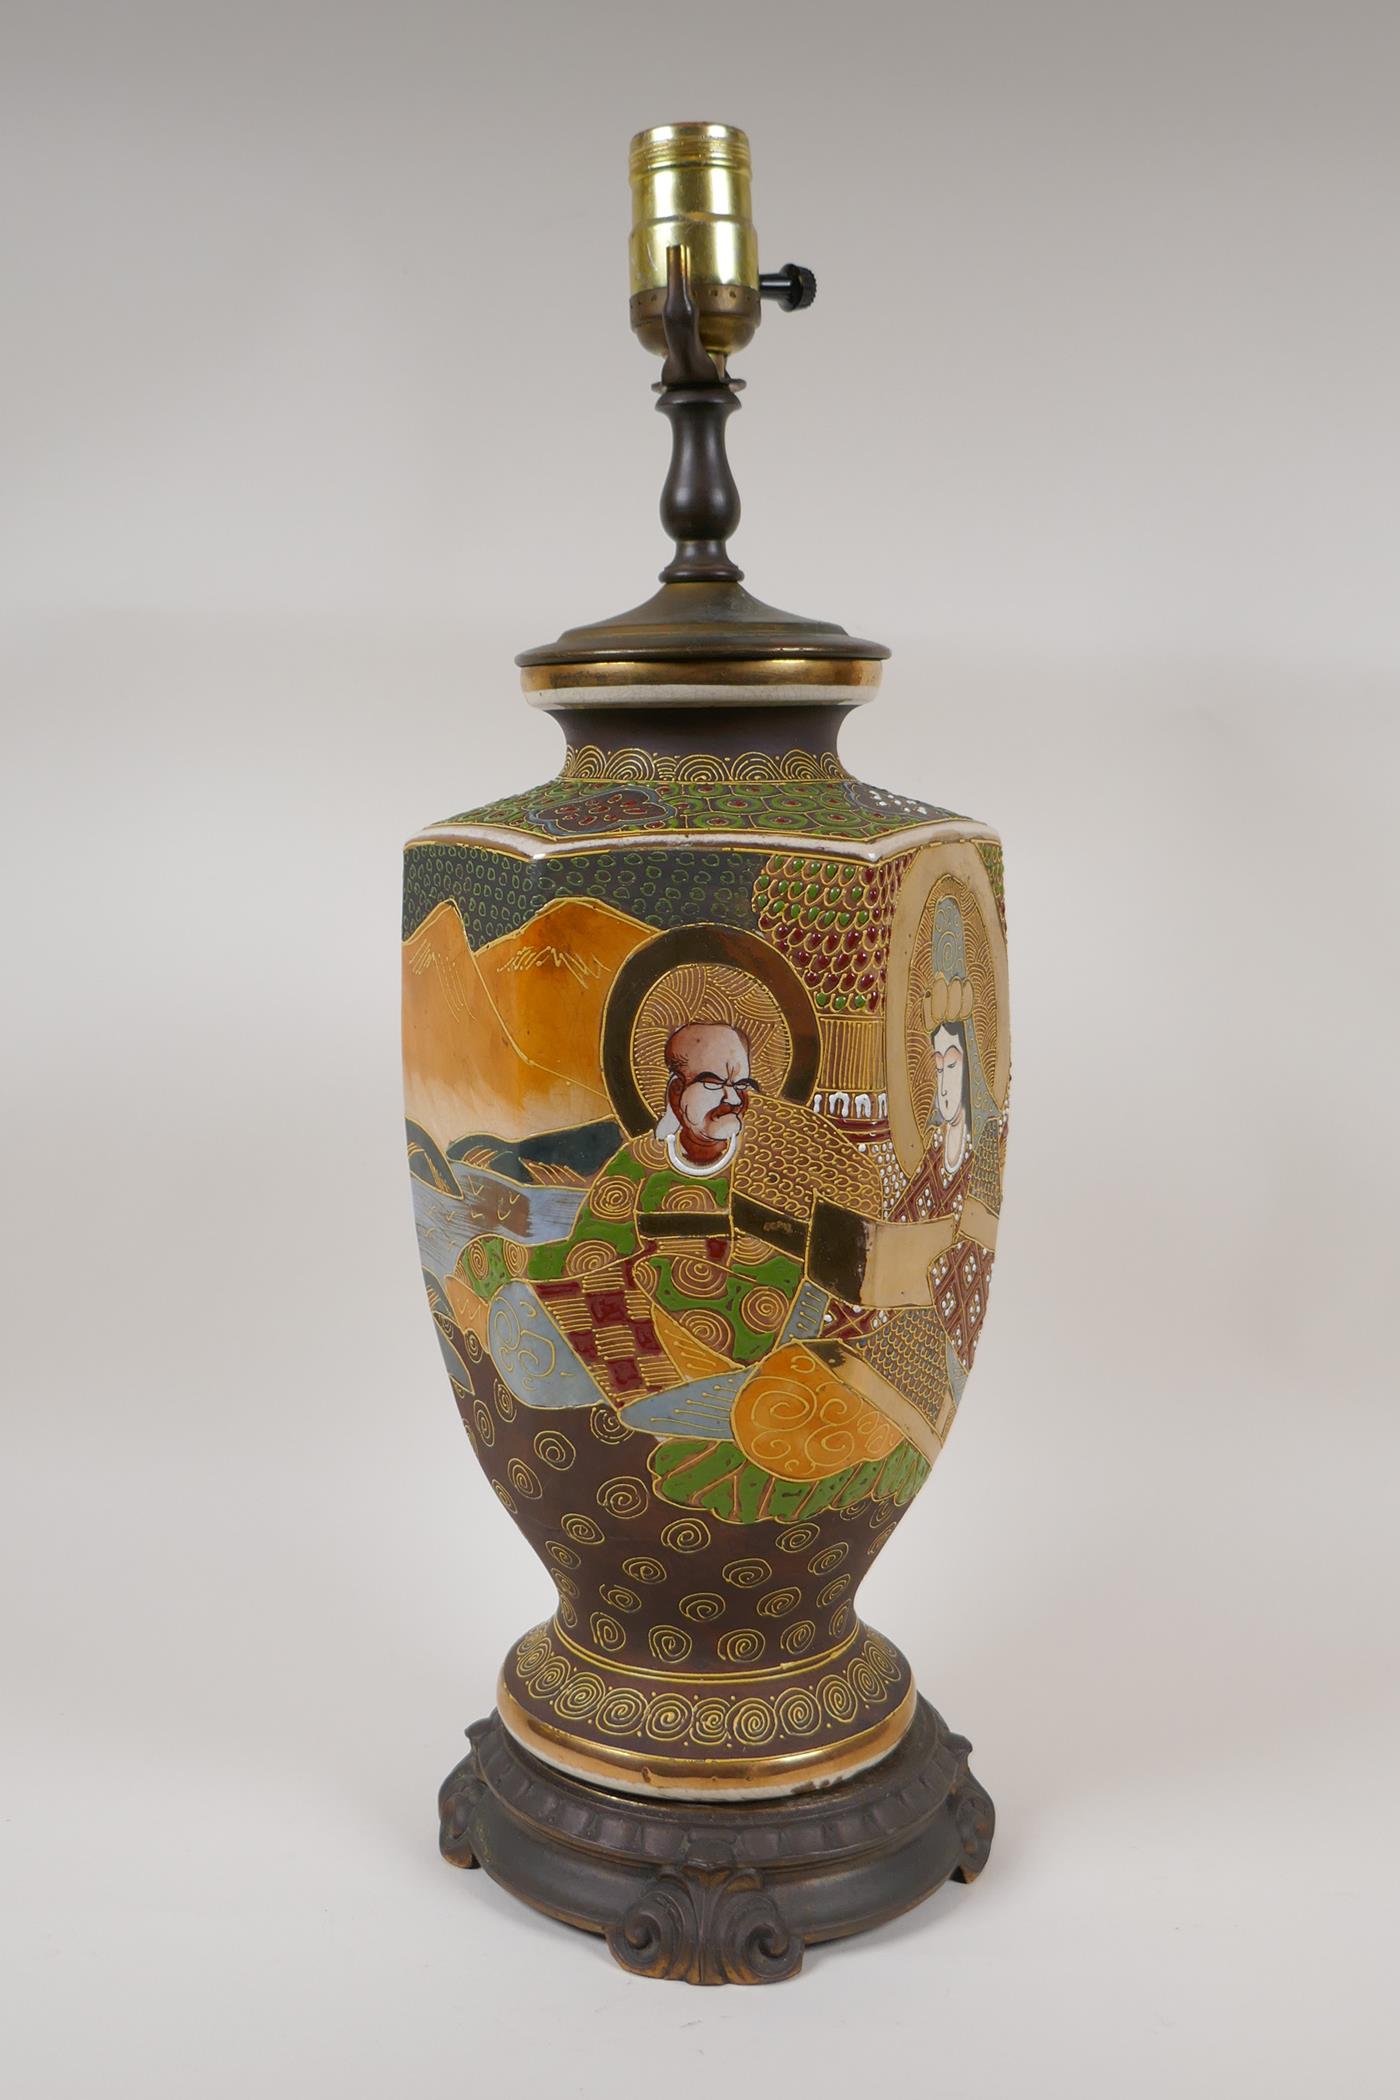 A Japanese Satsuma pottery lamp with figural decoration and bronzed metal mounts, 18½" high